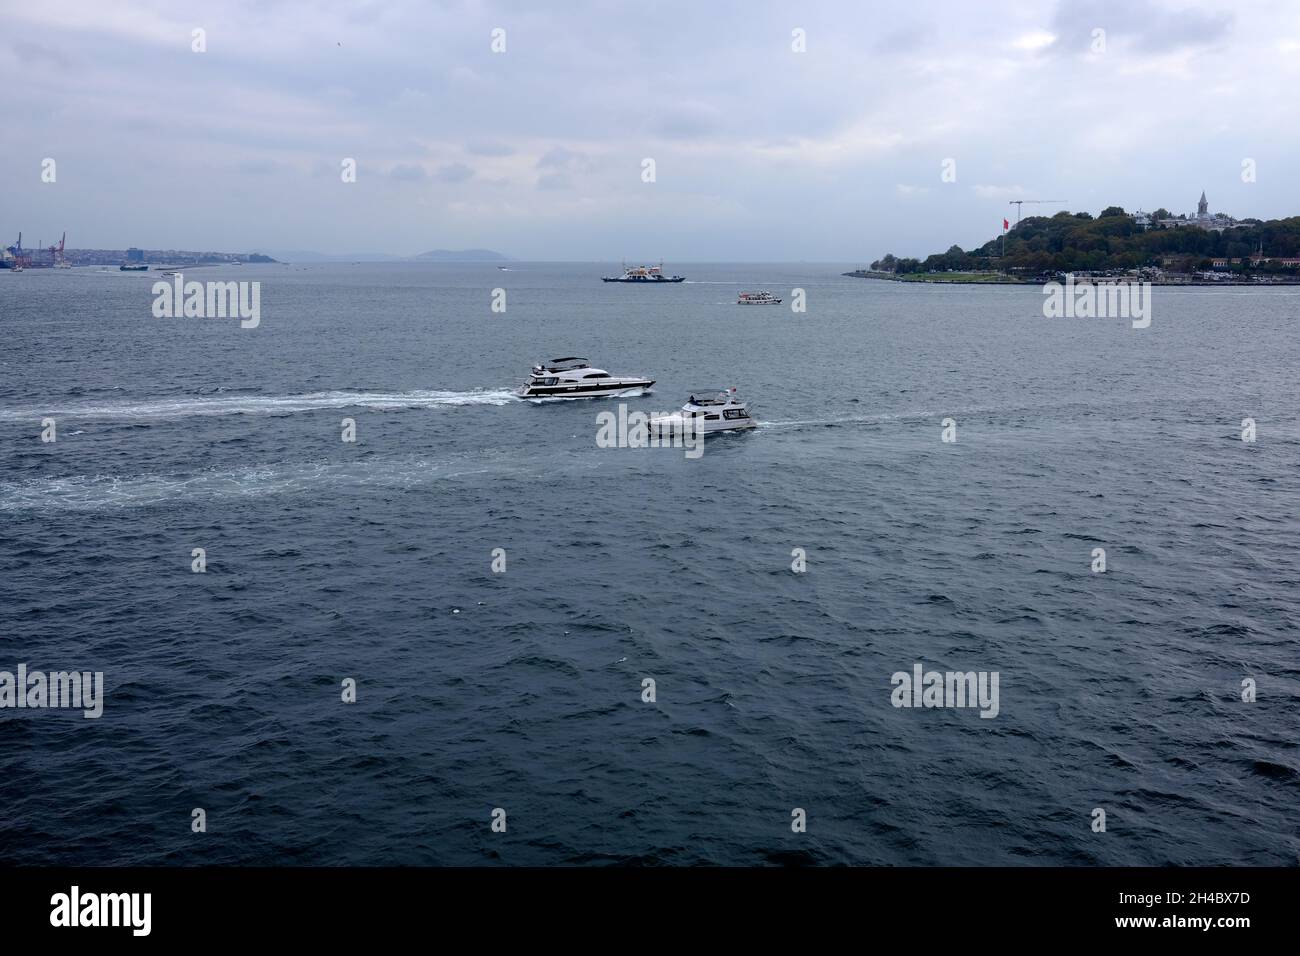 Boat and ship traffic on the Bosphorus in Istanbul, Turkey Stock Photo